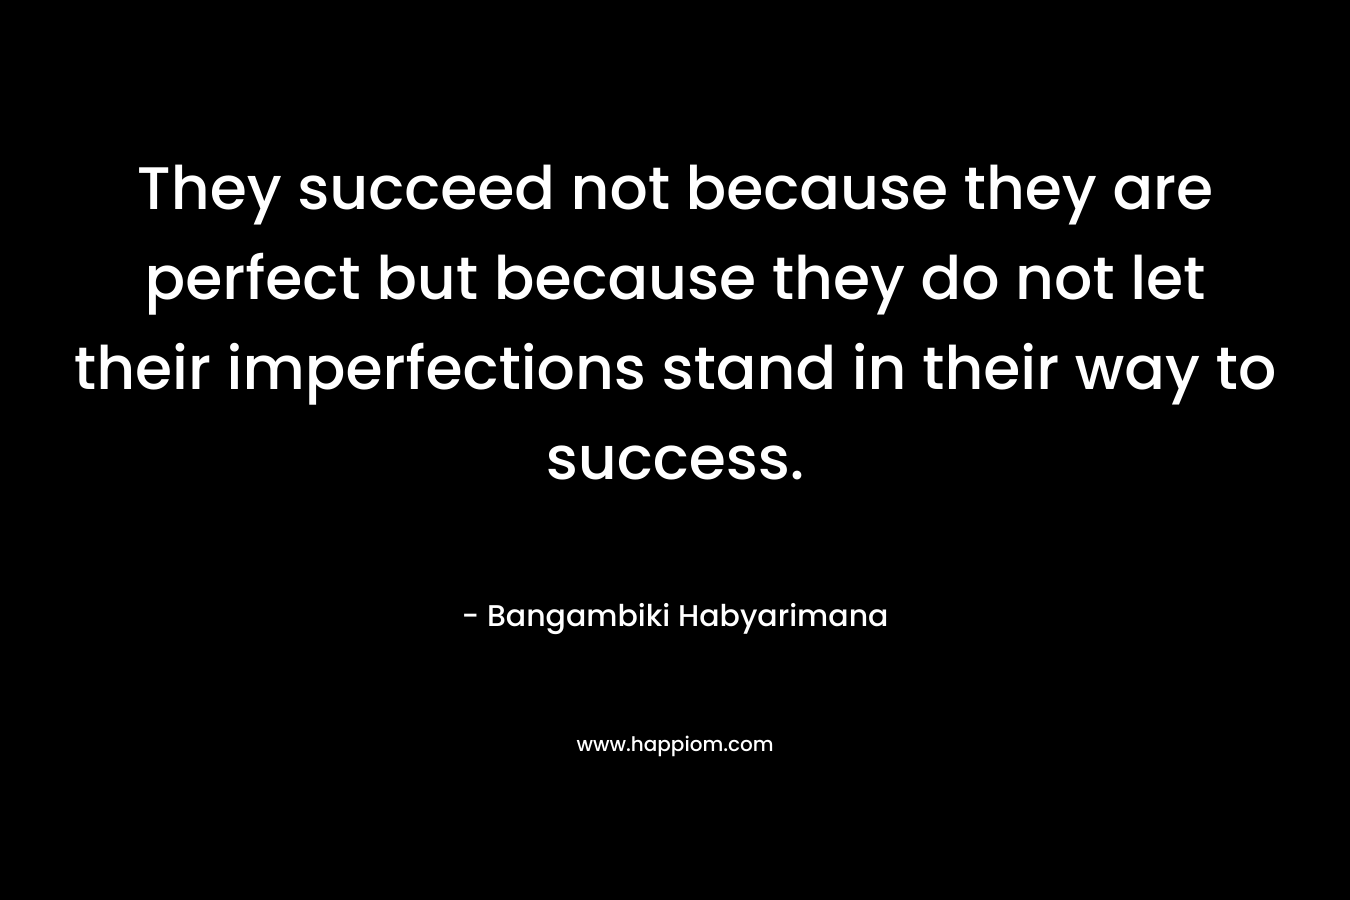 They succeed not because they are perfect but because they do not let their imperfections stand in their way to success. – Bangambiki Habyarimana